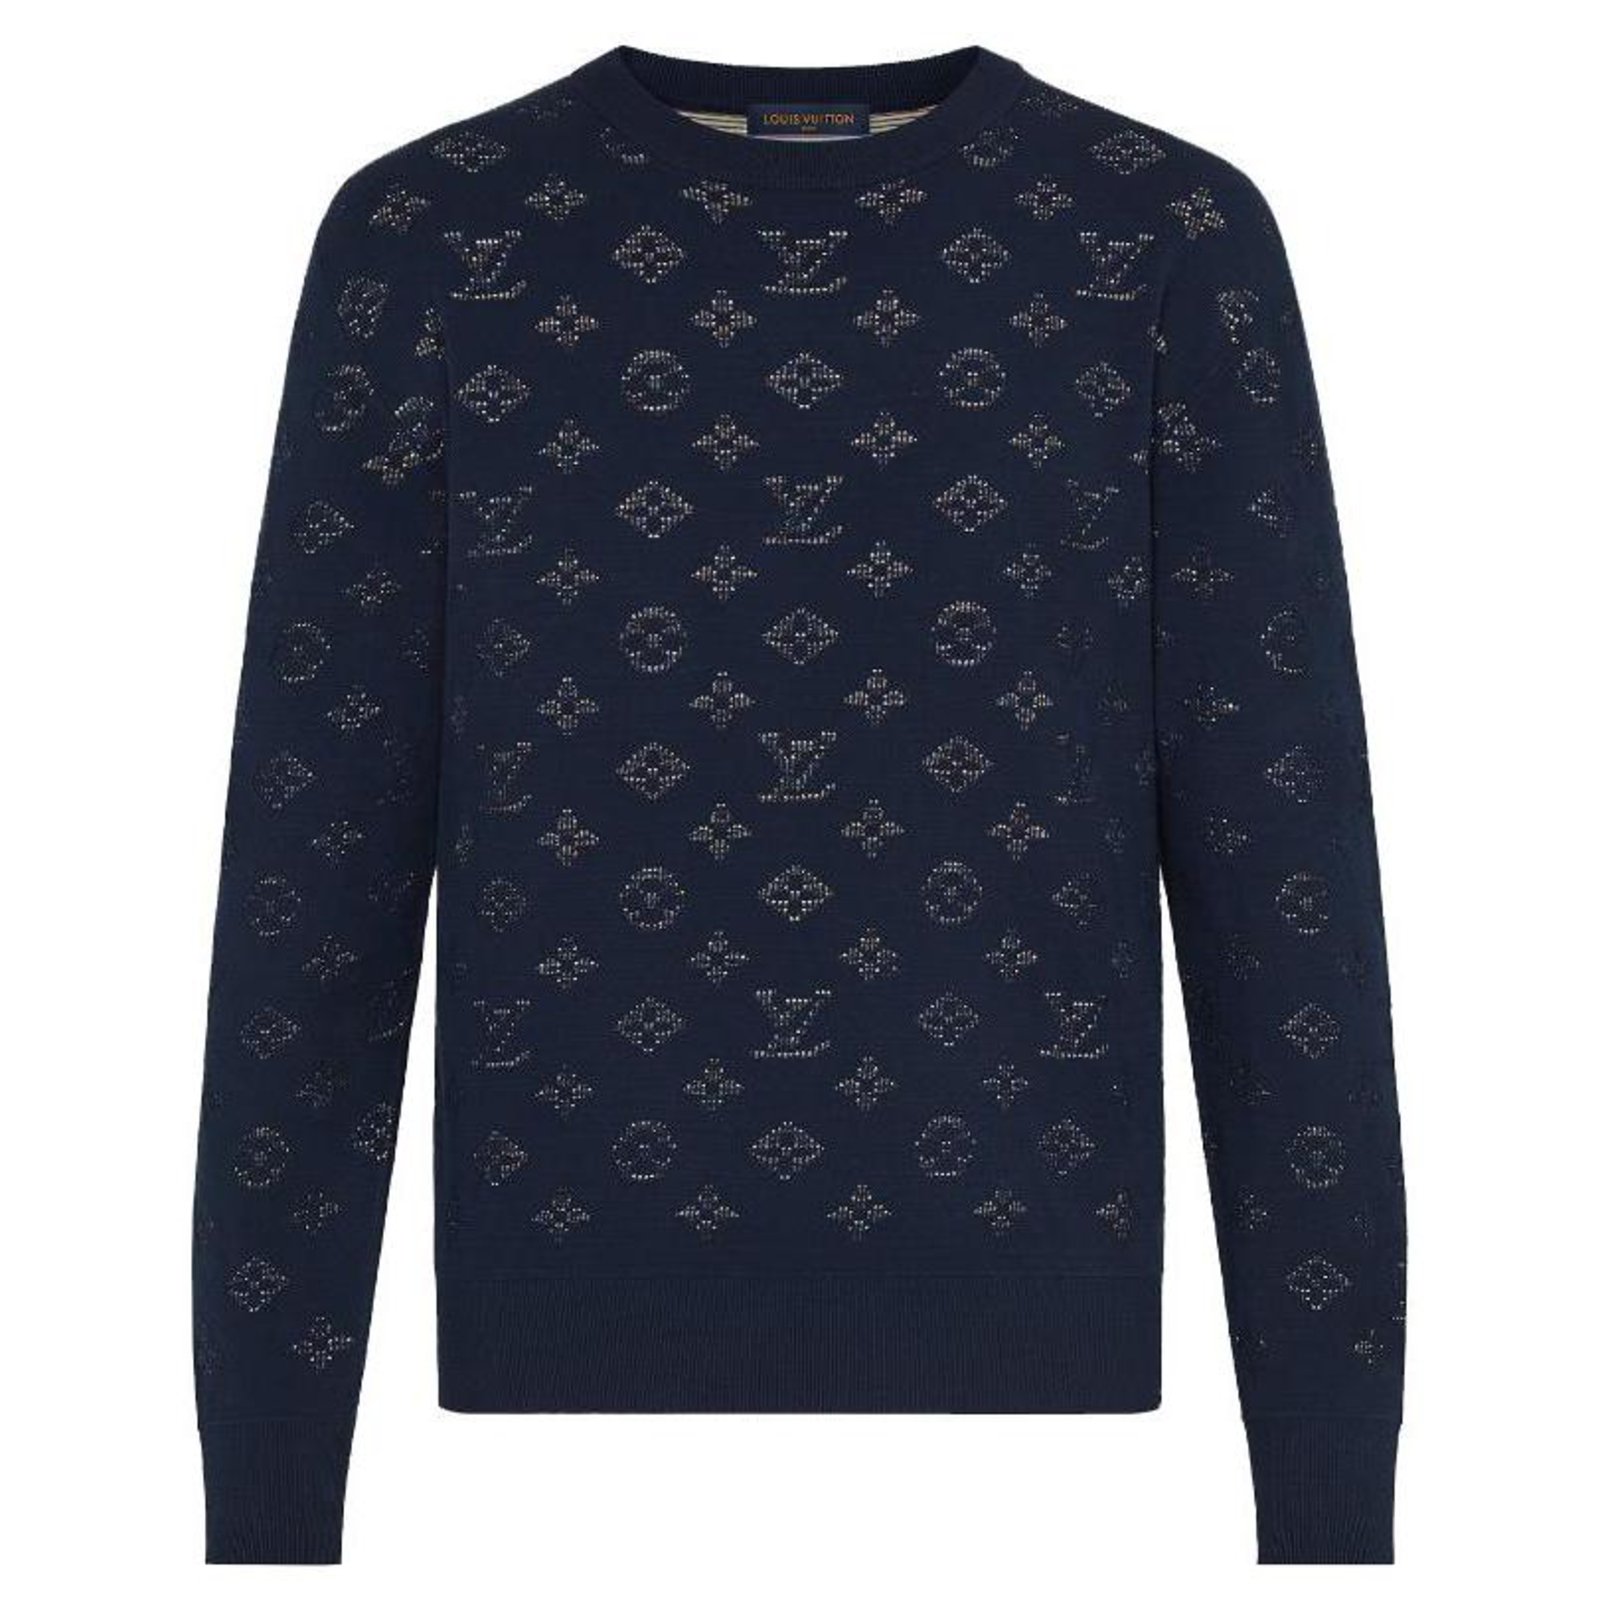 Louis Vuitton 2020 Printed Pullover